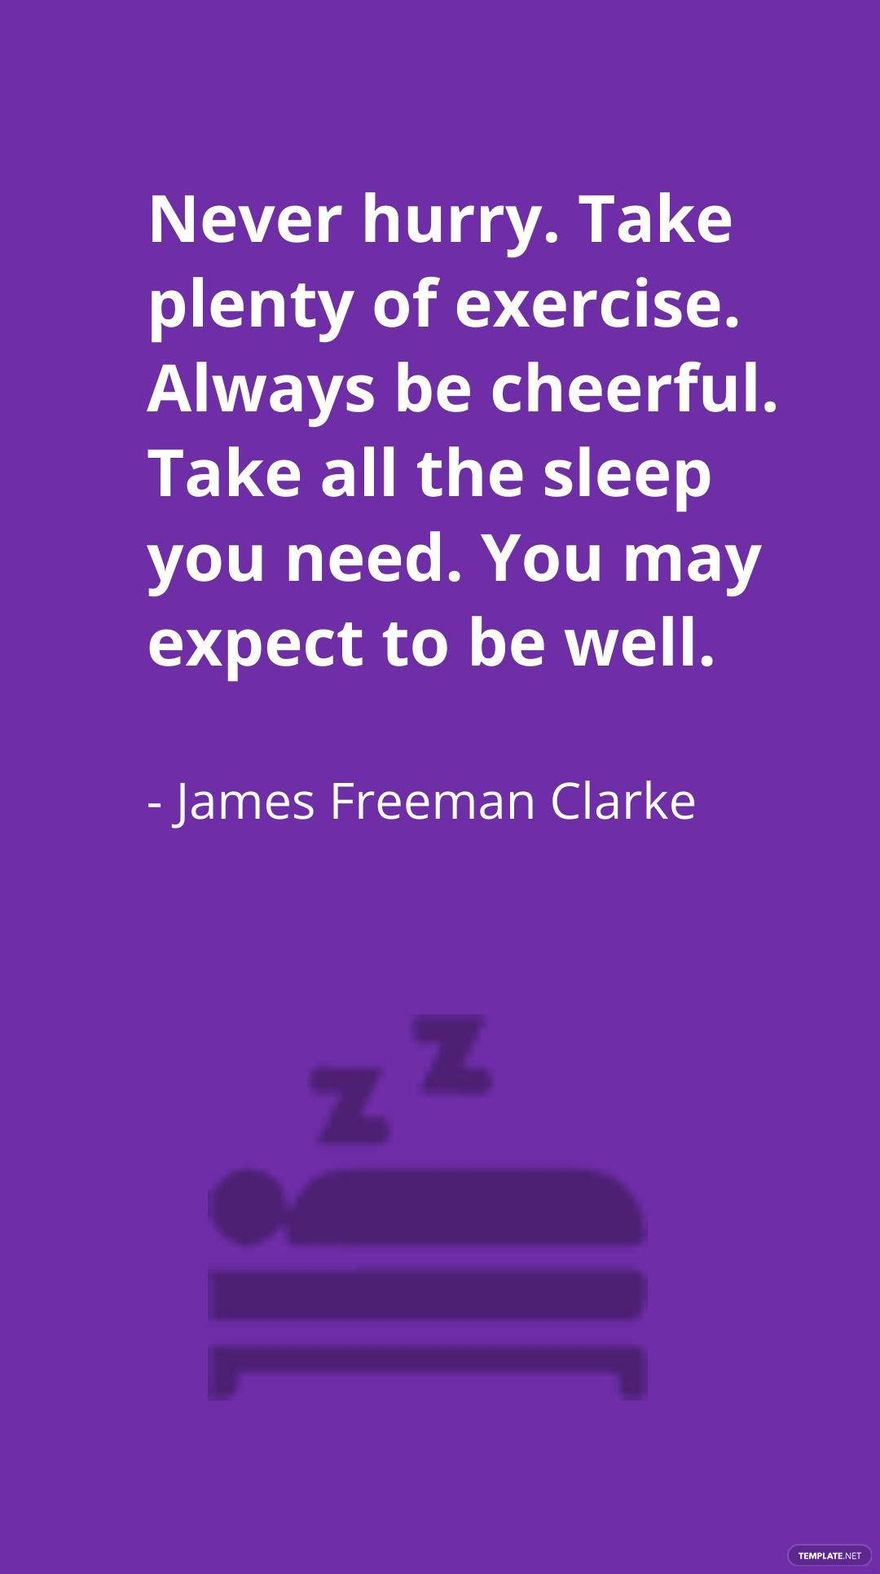 James Freeman Clarke - Never hurry. Take plenty of exercise. Always be cheerful. Take all the sleep you need. You may expect to be well.